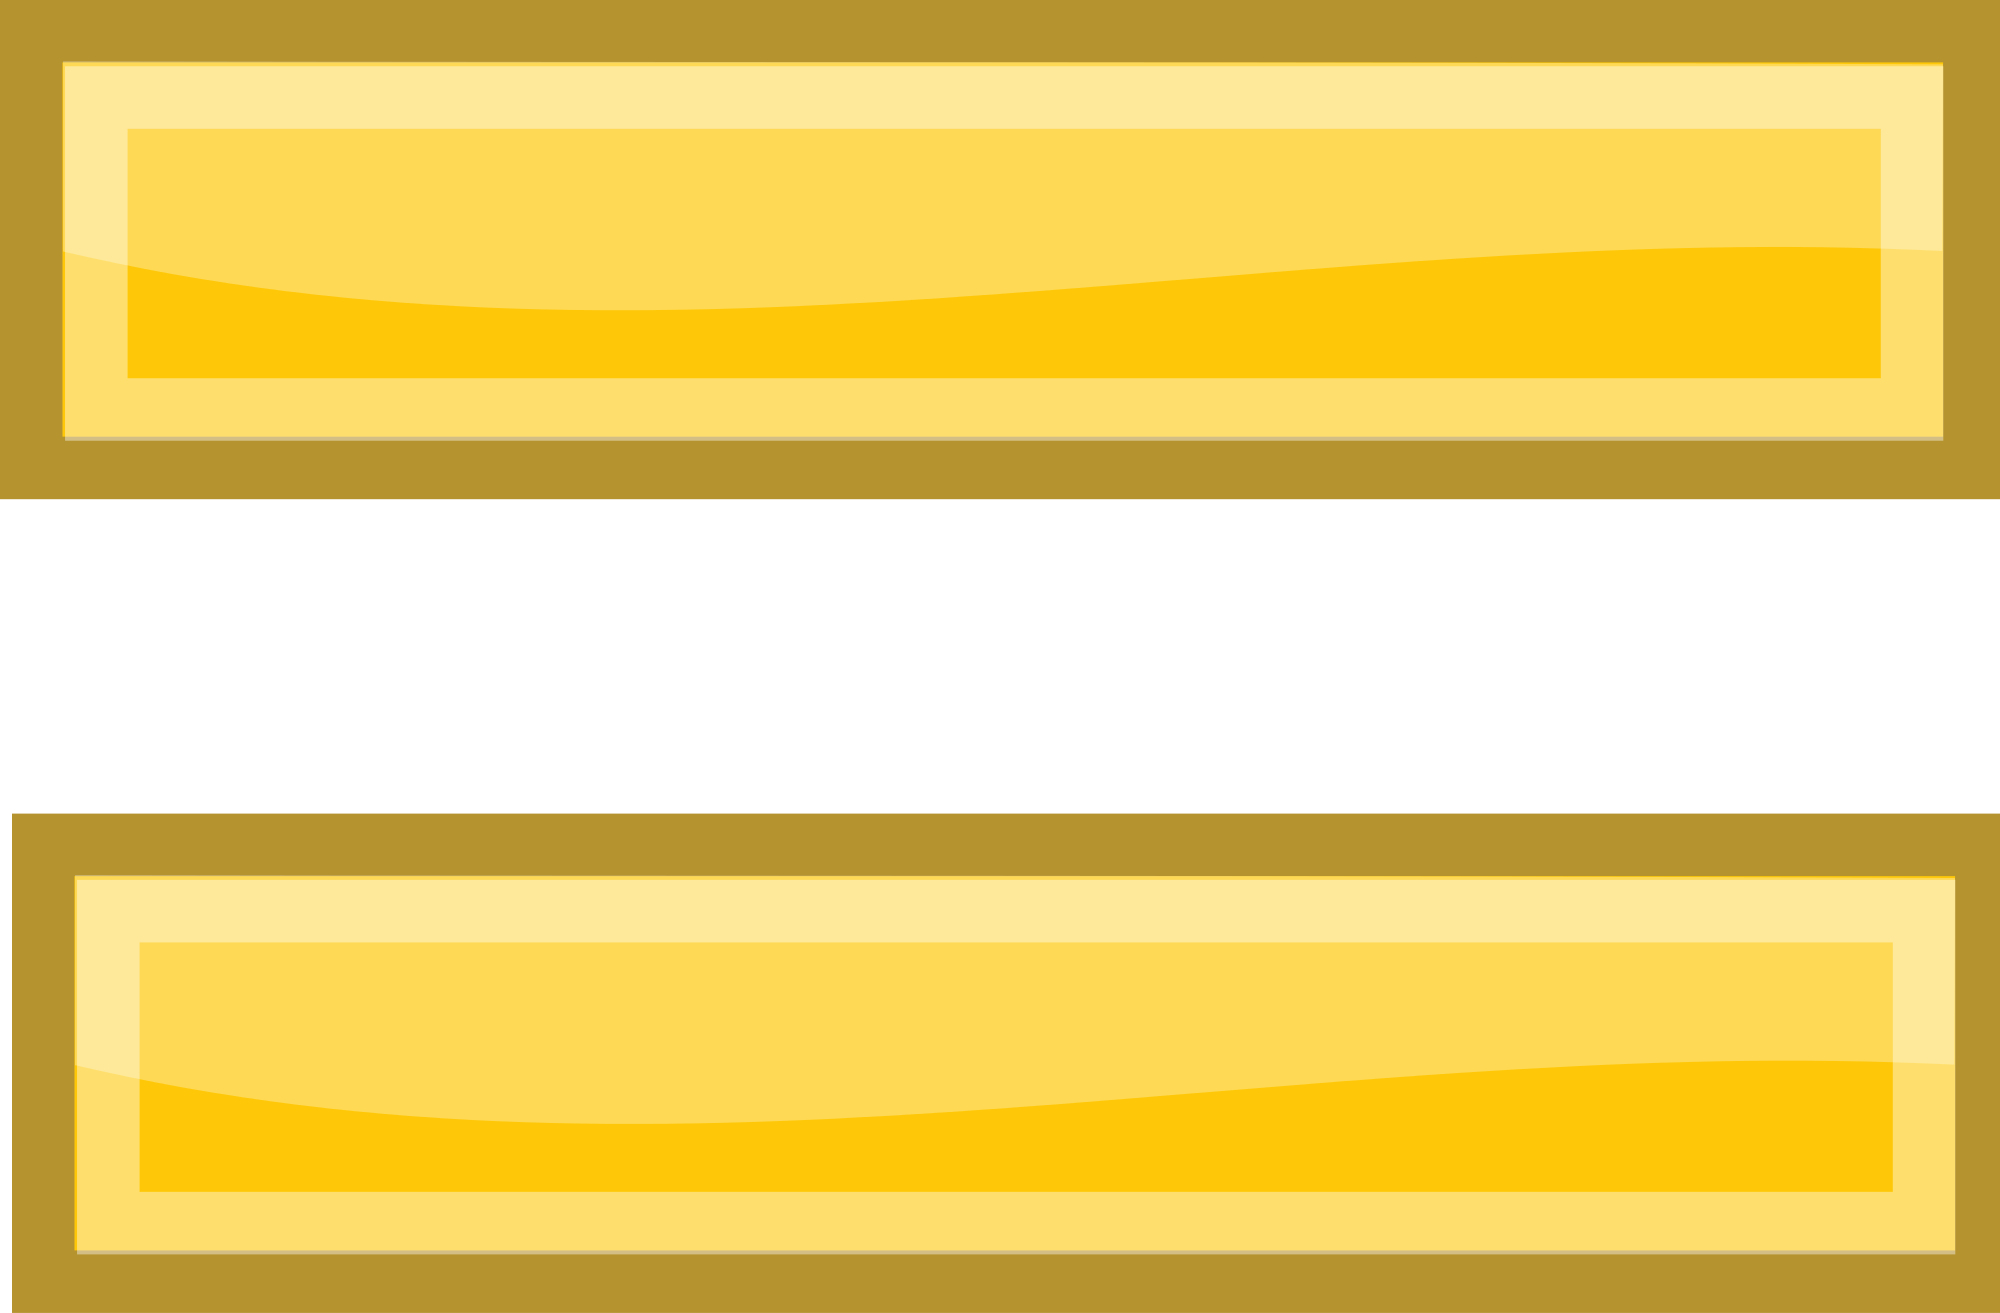 Знак равно PNG